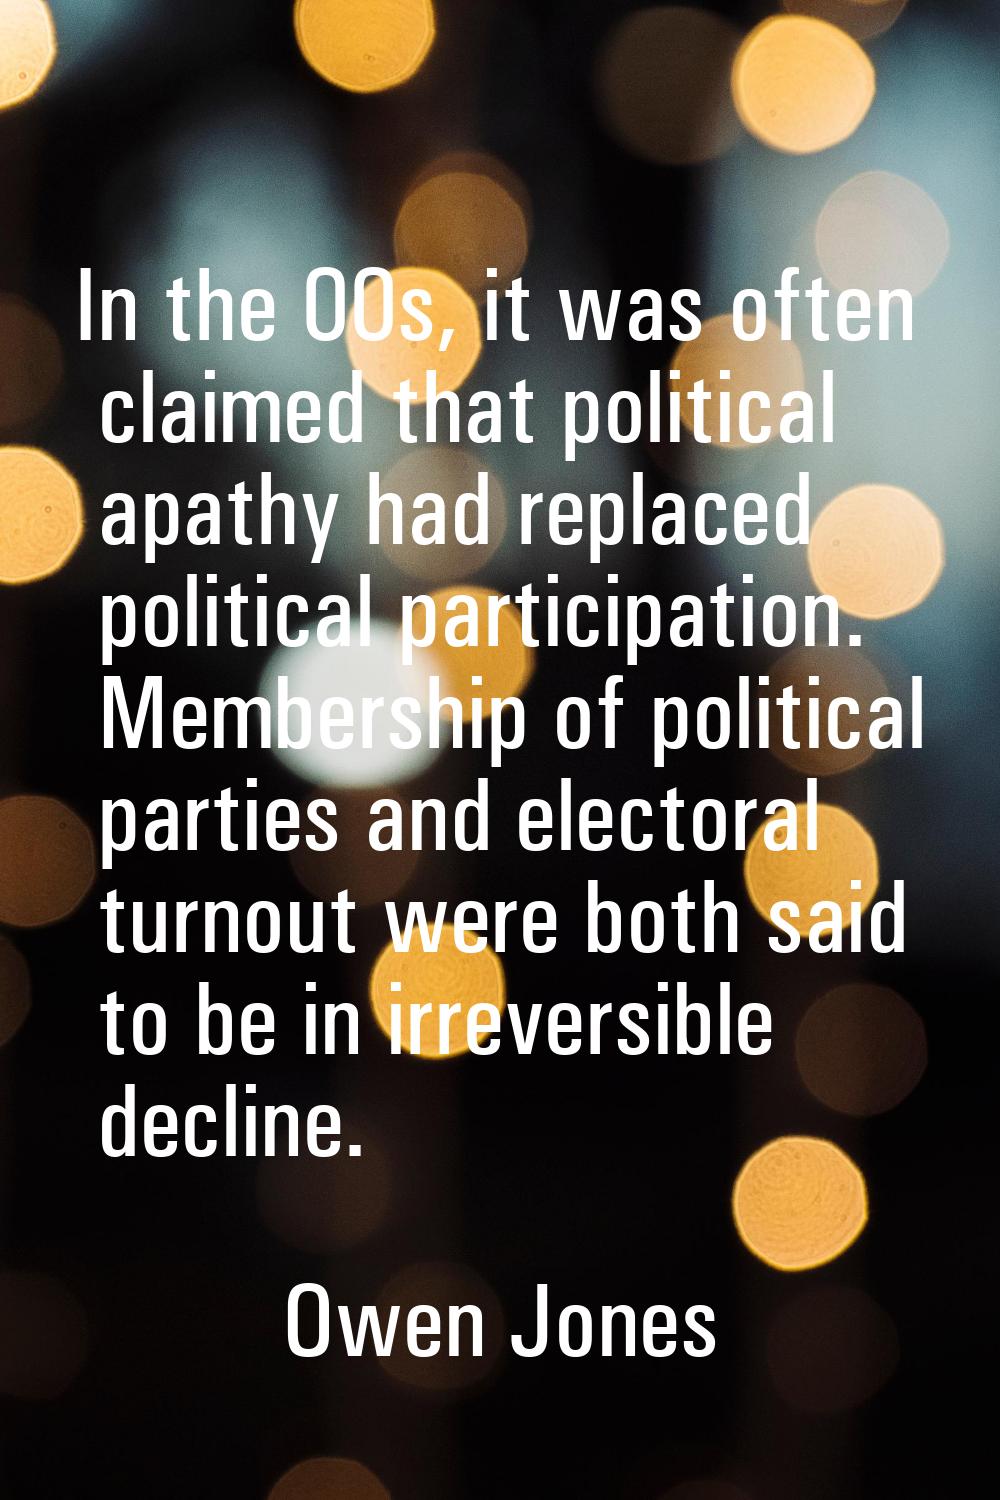 In the 00s, it was often claimed that political apathy had replaced political participation. Member